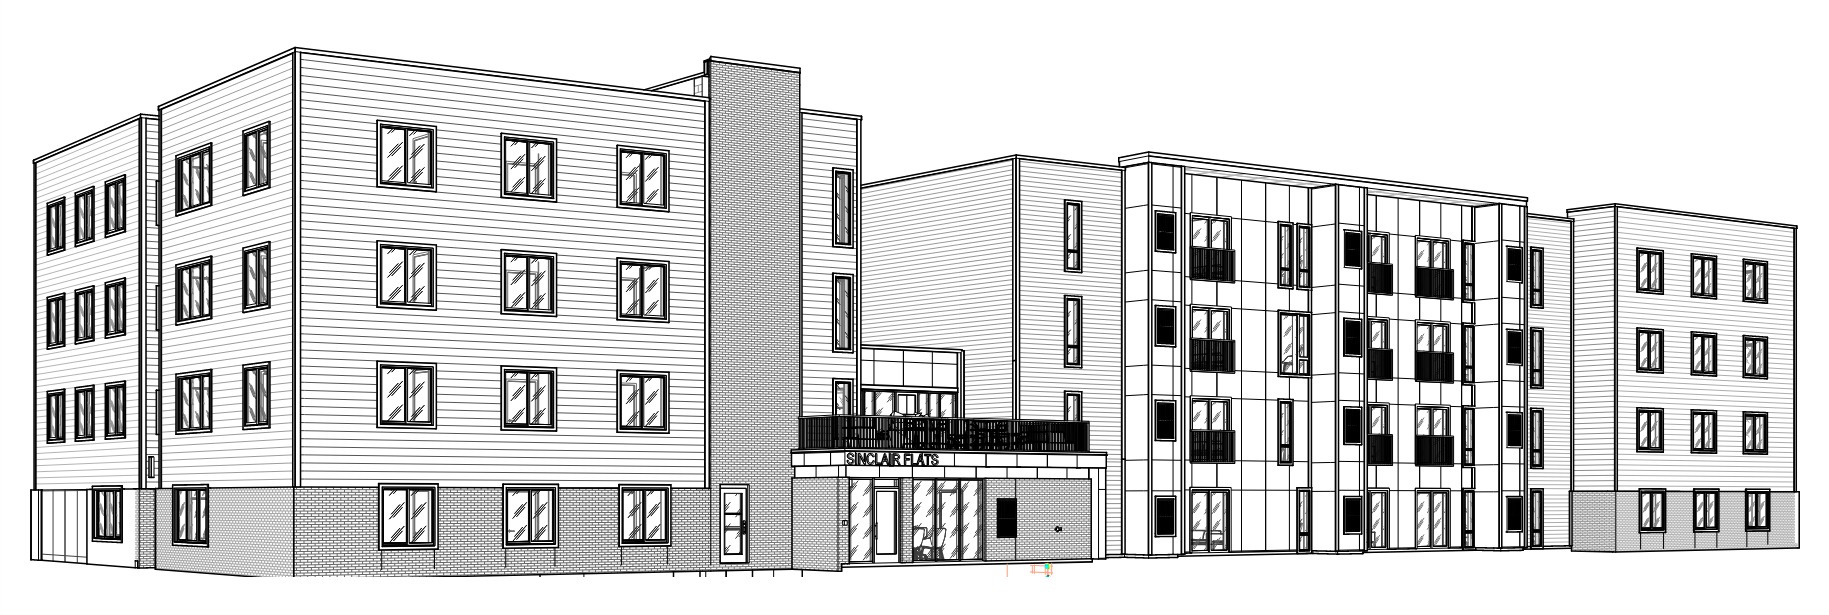 Sinclair Flats Rendering – from Plans